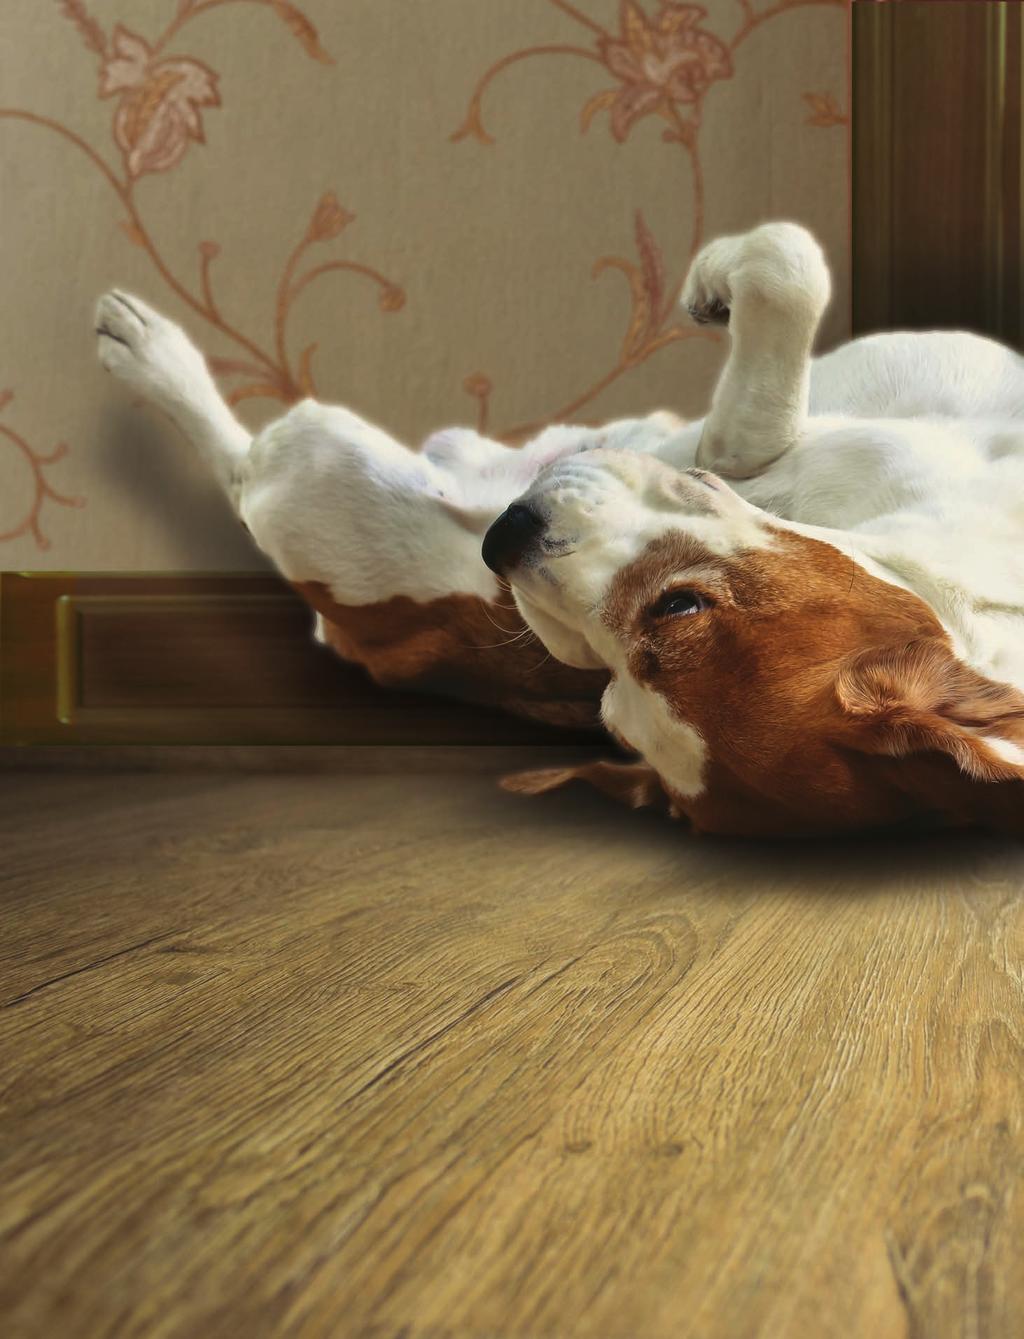 Pet-Friendly Flooring Perfect for Pets and Owners In the U.S., over 65% of households have a pet and we spend more than $60 billion on them each year.